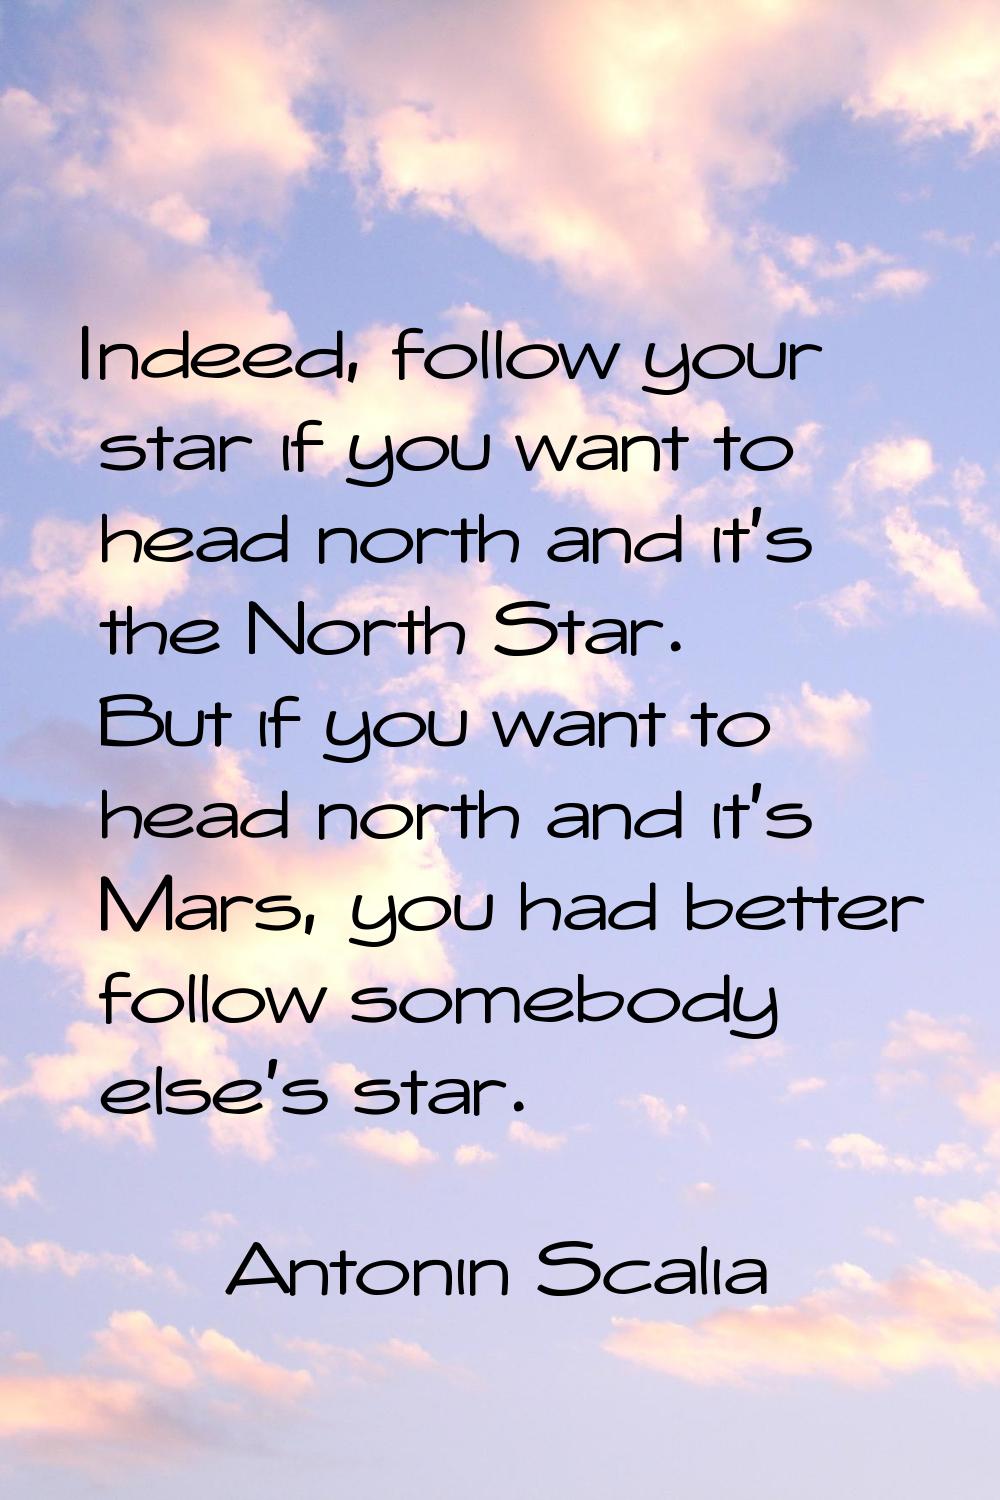 Indeed, follow your star if you want to head north and it's the North Star. But if you want to head